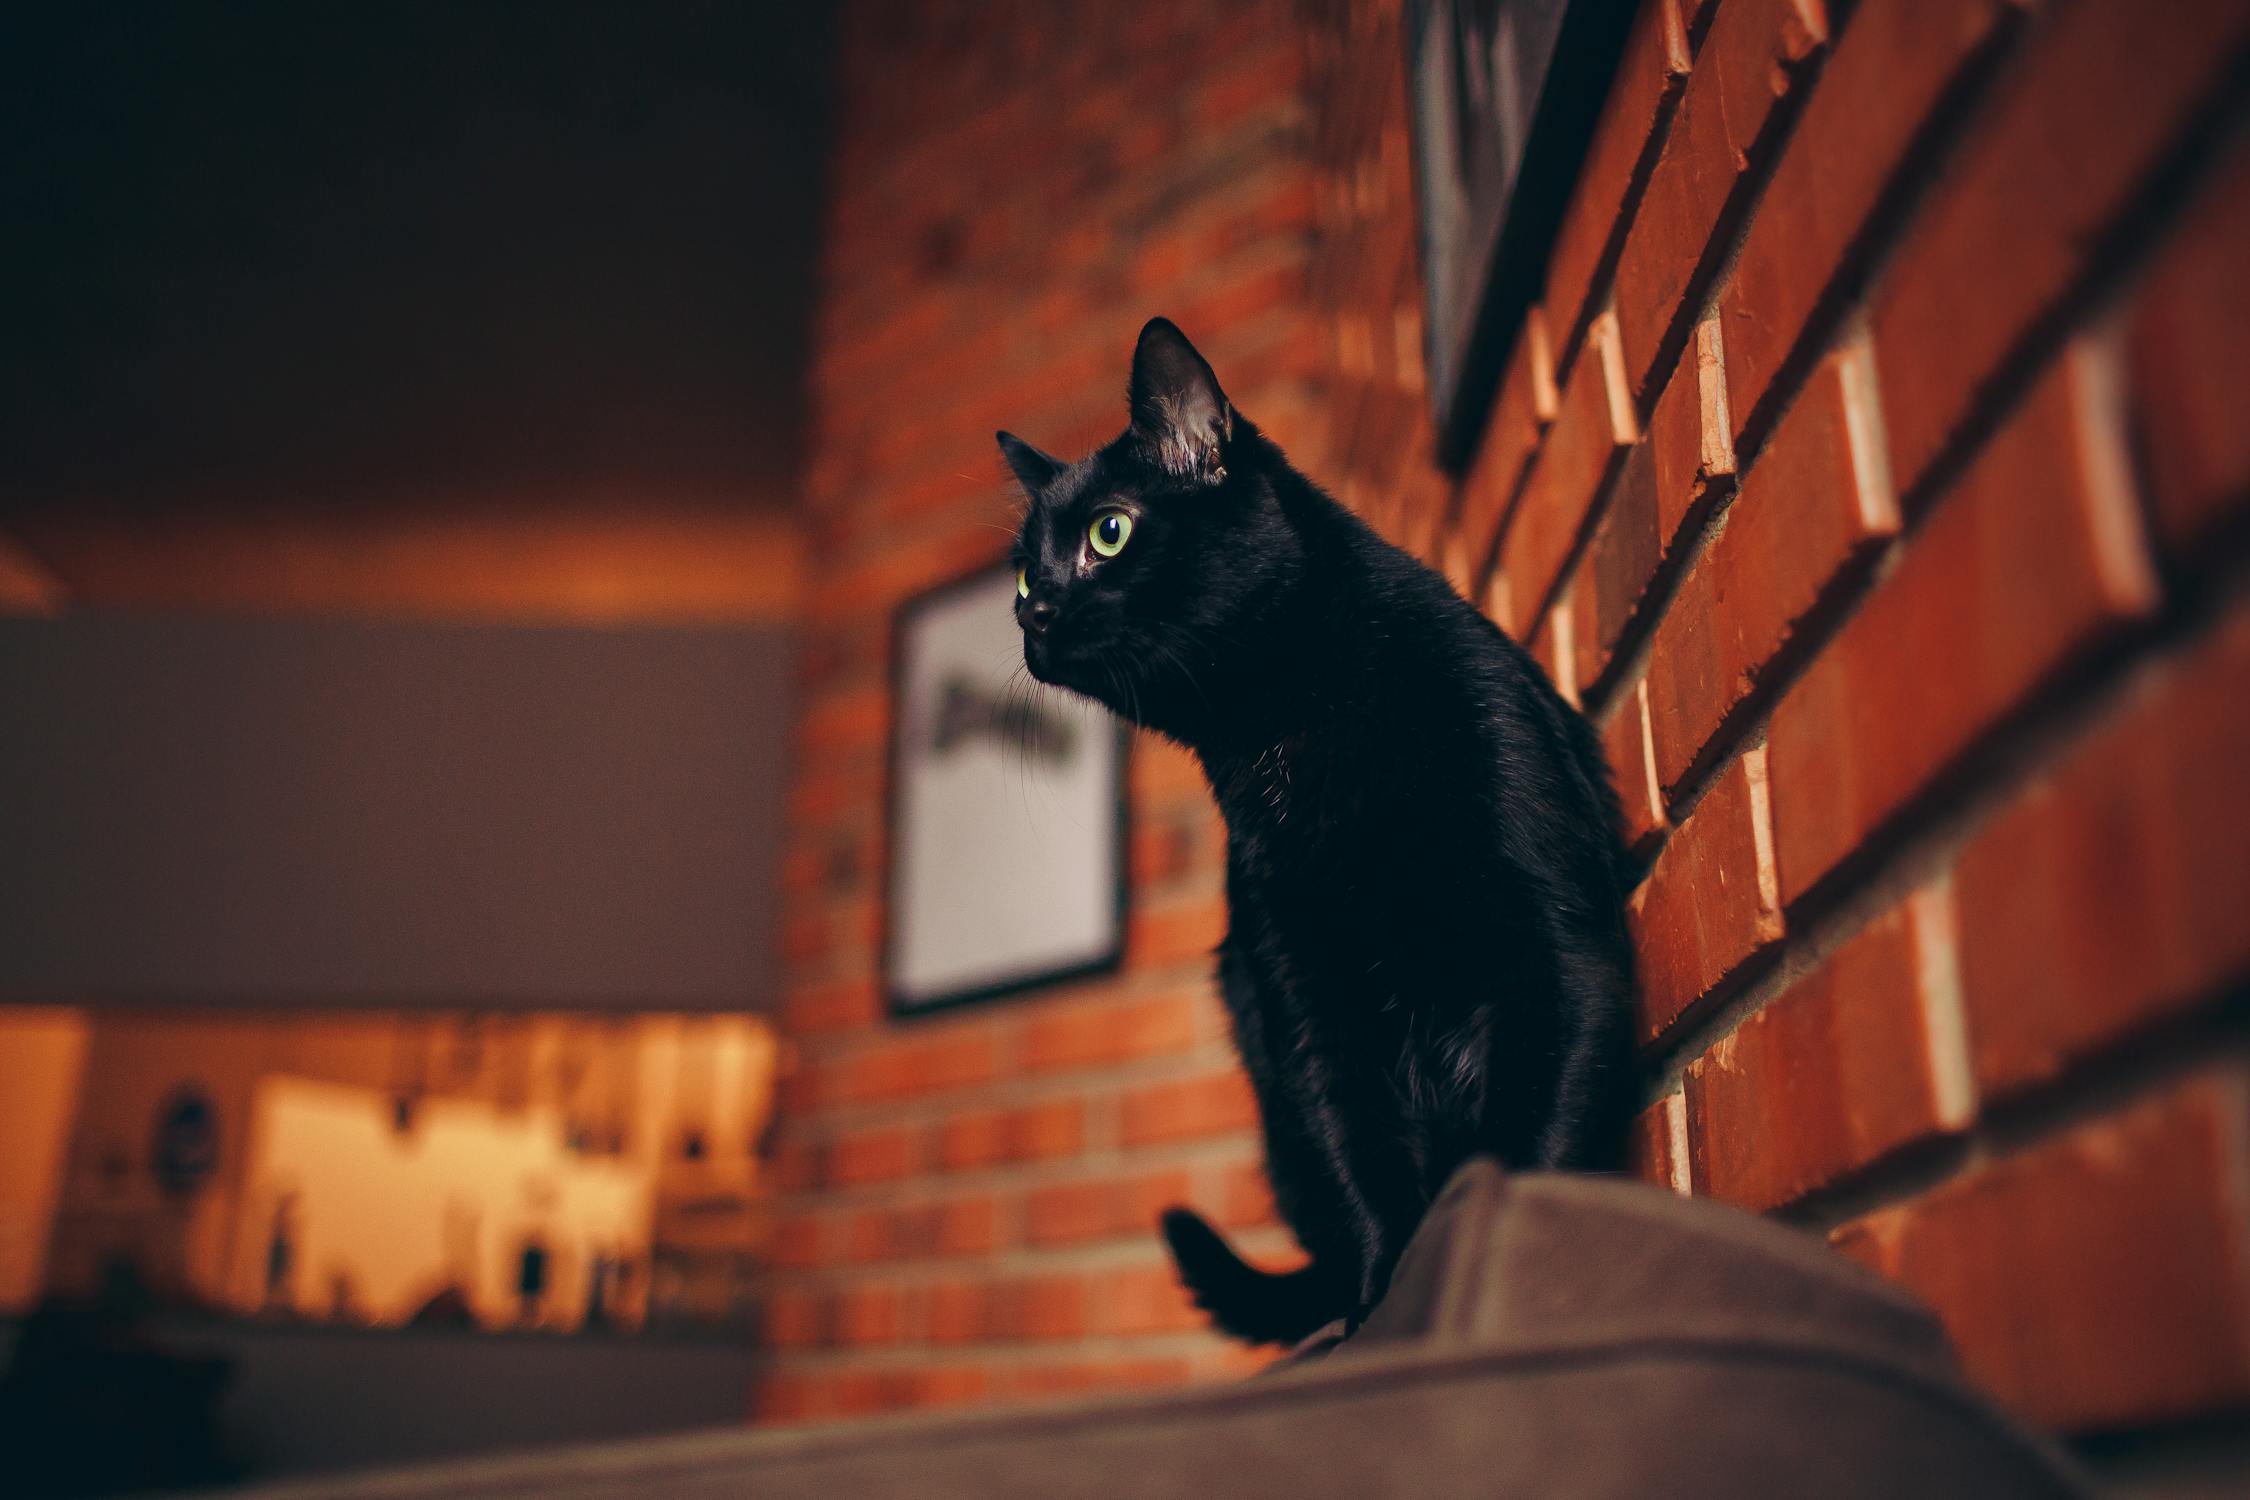 Black cat perched on red brick building